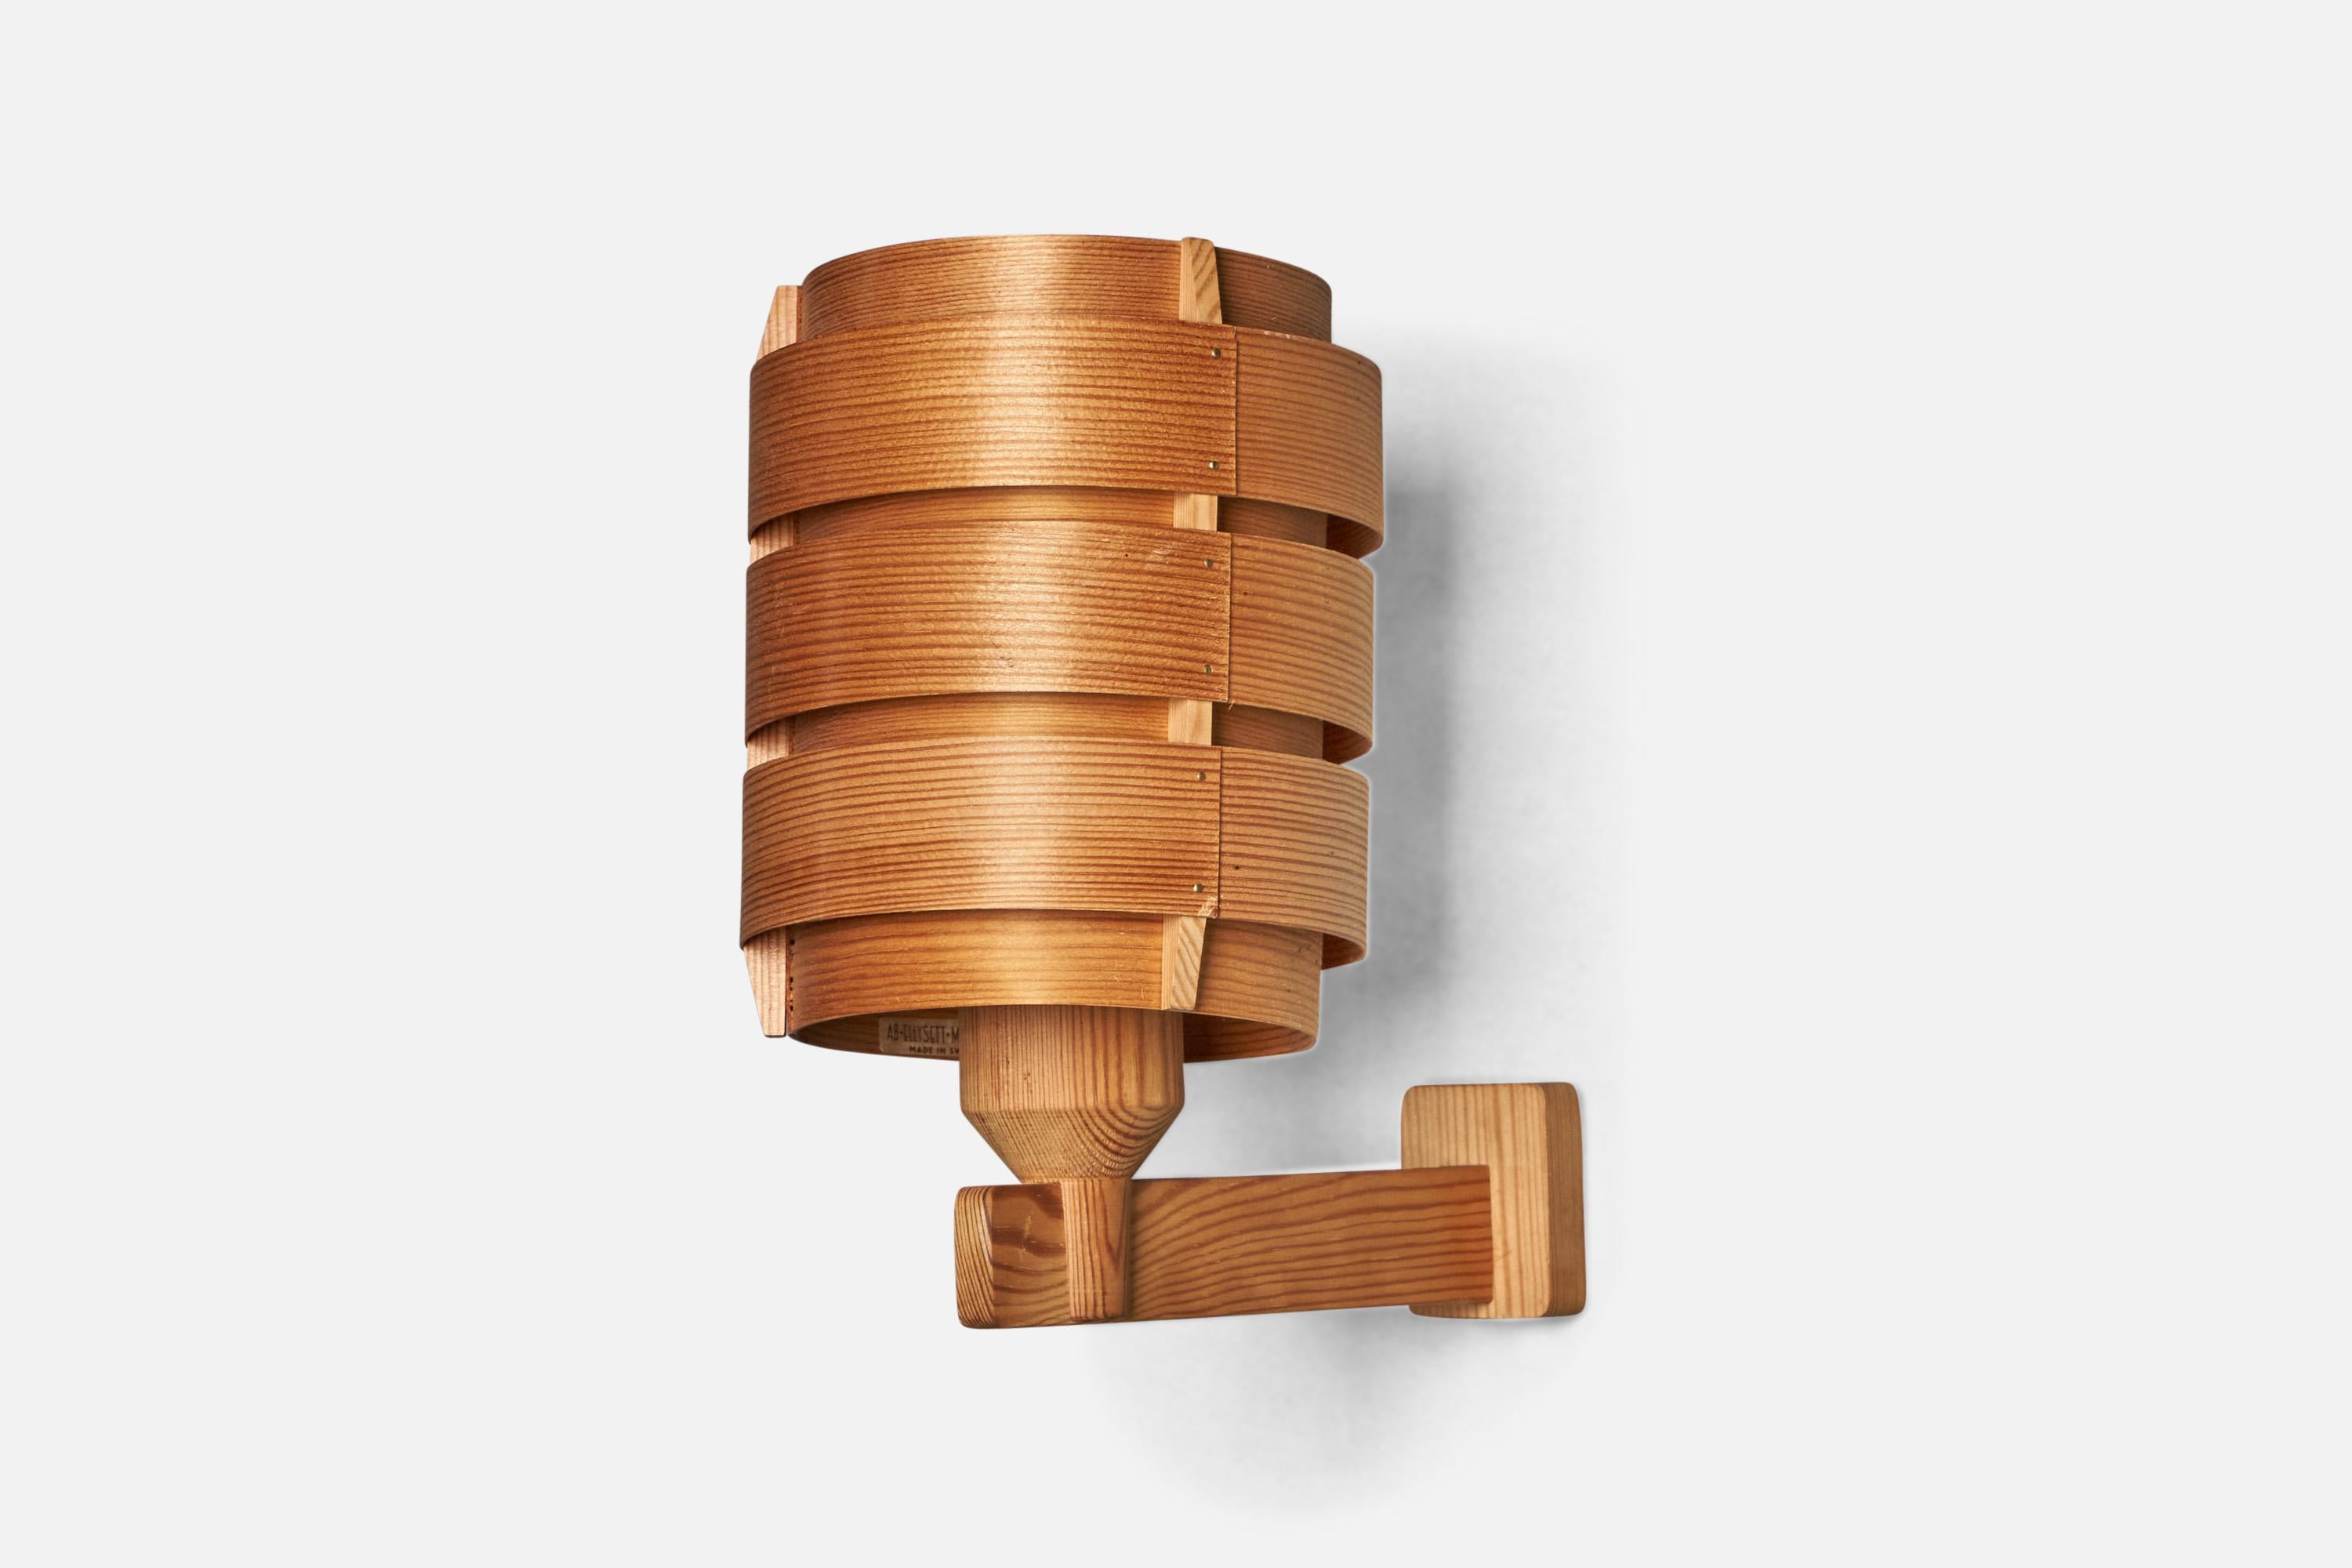 A pine and moulded pine-veneer wall light designed by Hans-Agne Jakobsson and produced by Elysett AB, Sweden, 1970s.

Overall Dimensions (inches): 10.25” H x 6” W x 9.25” D
Back Plate Dimensions (inches): 2.25” H x 1.9” W x 1.15” D
Bulb